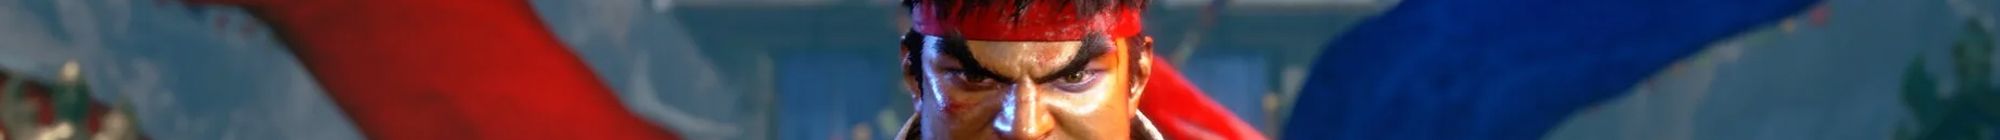 street-fighter-6-complete-guide-banner-4